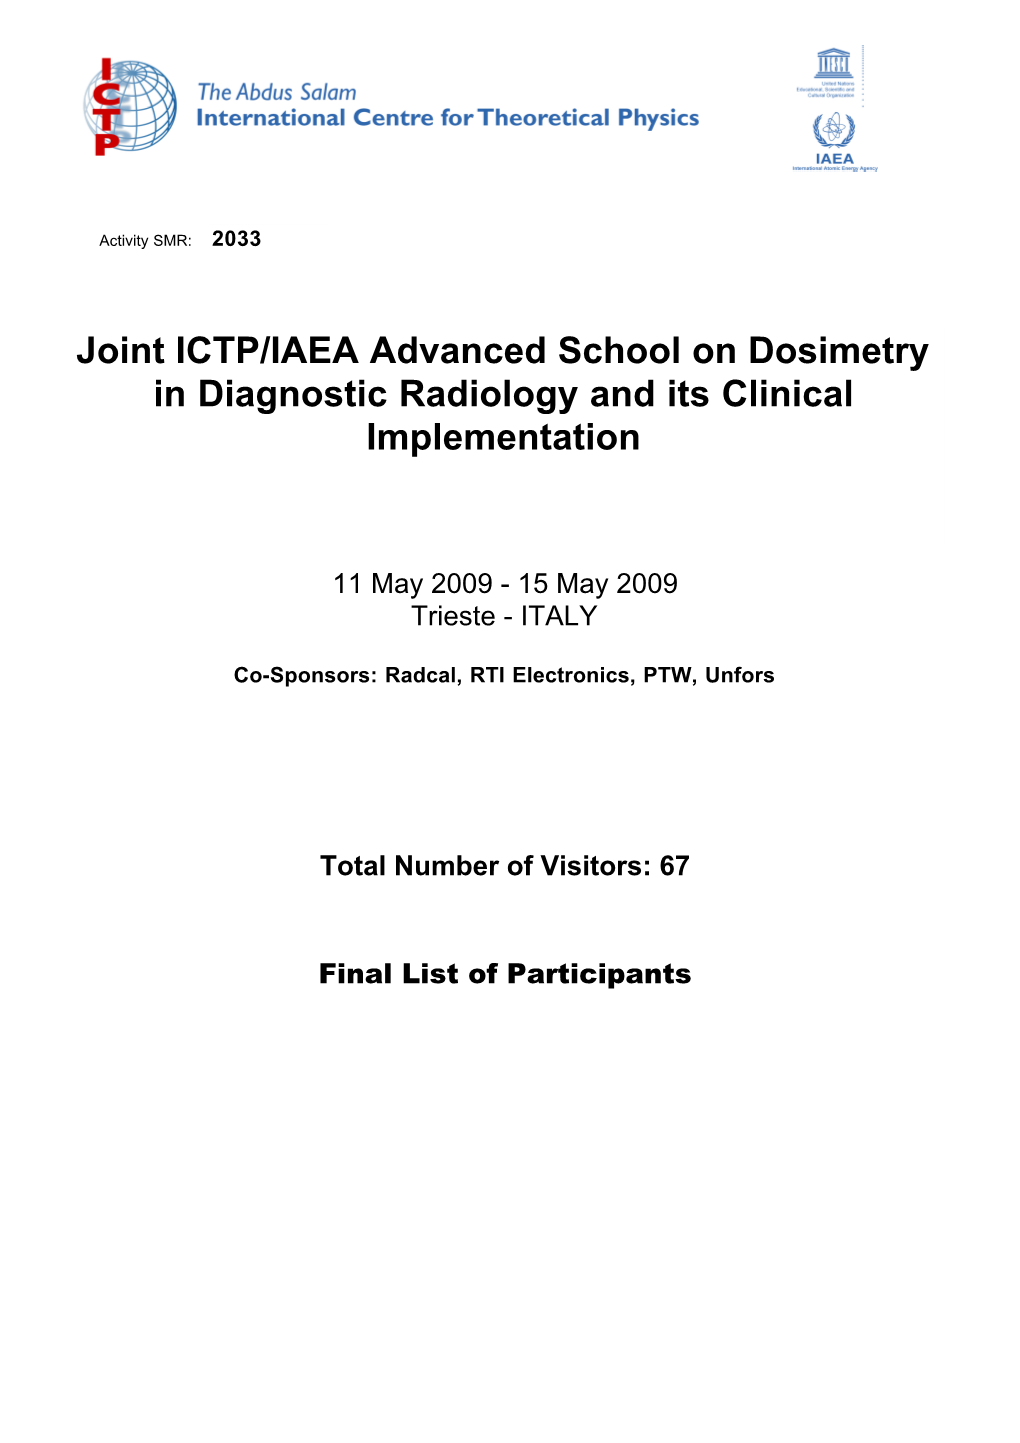 Joint ICTP/IAEA Advanced School on Dosimetry in Diagnostic Radiology and Its Clinical Implementation